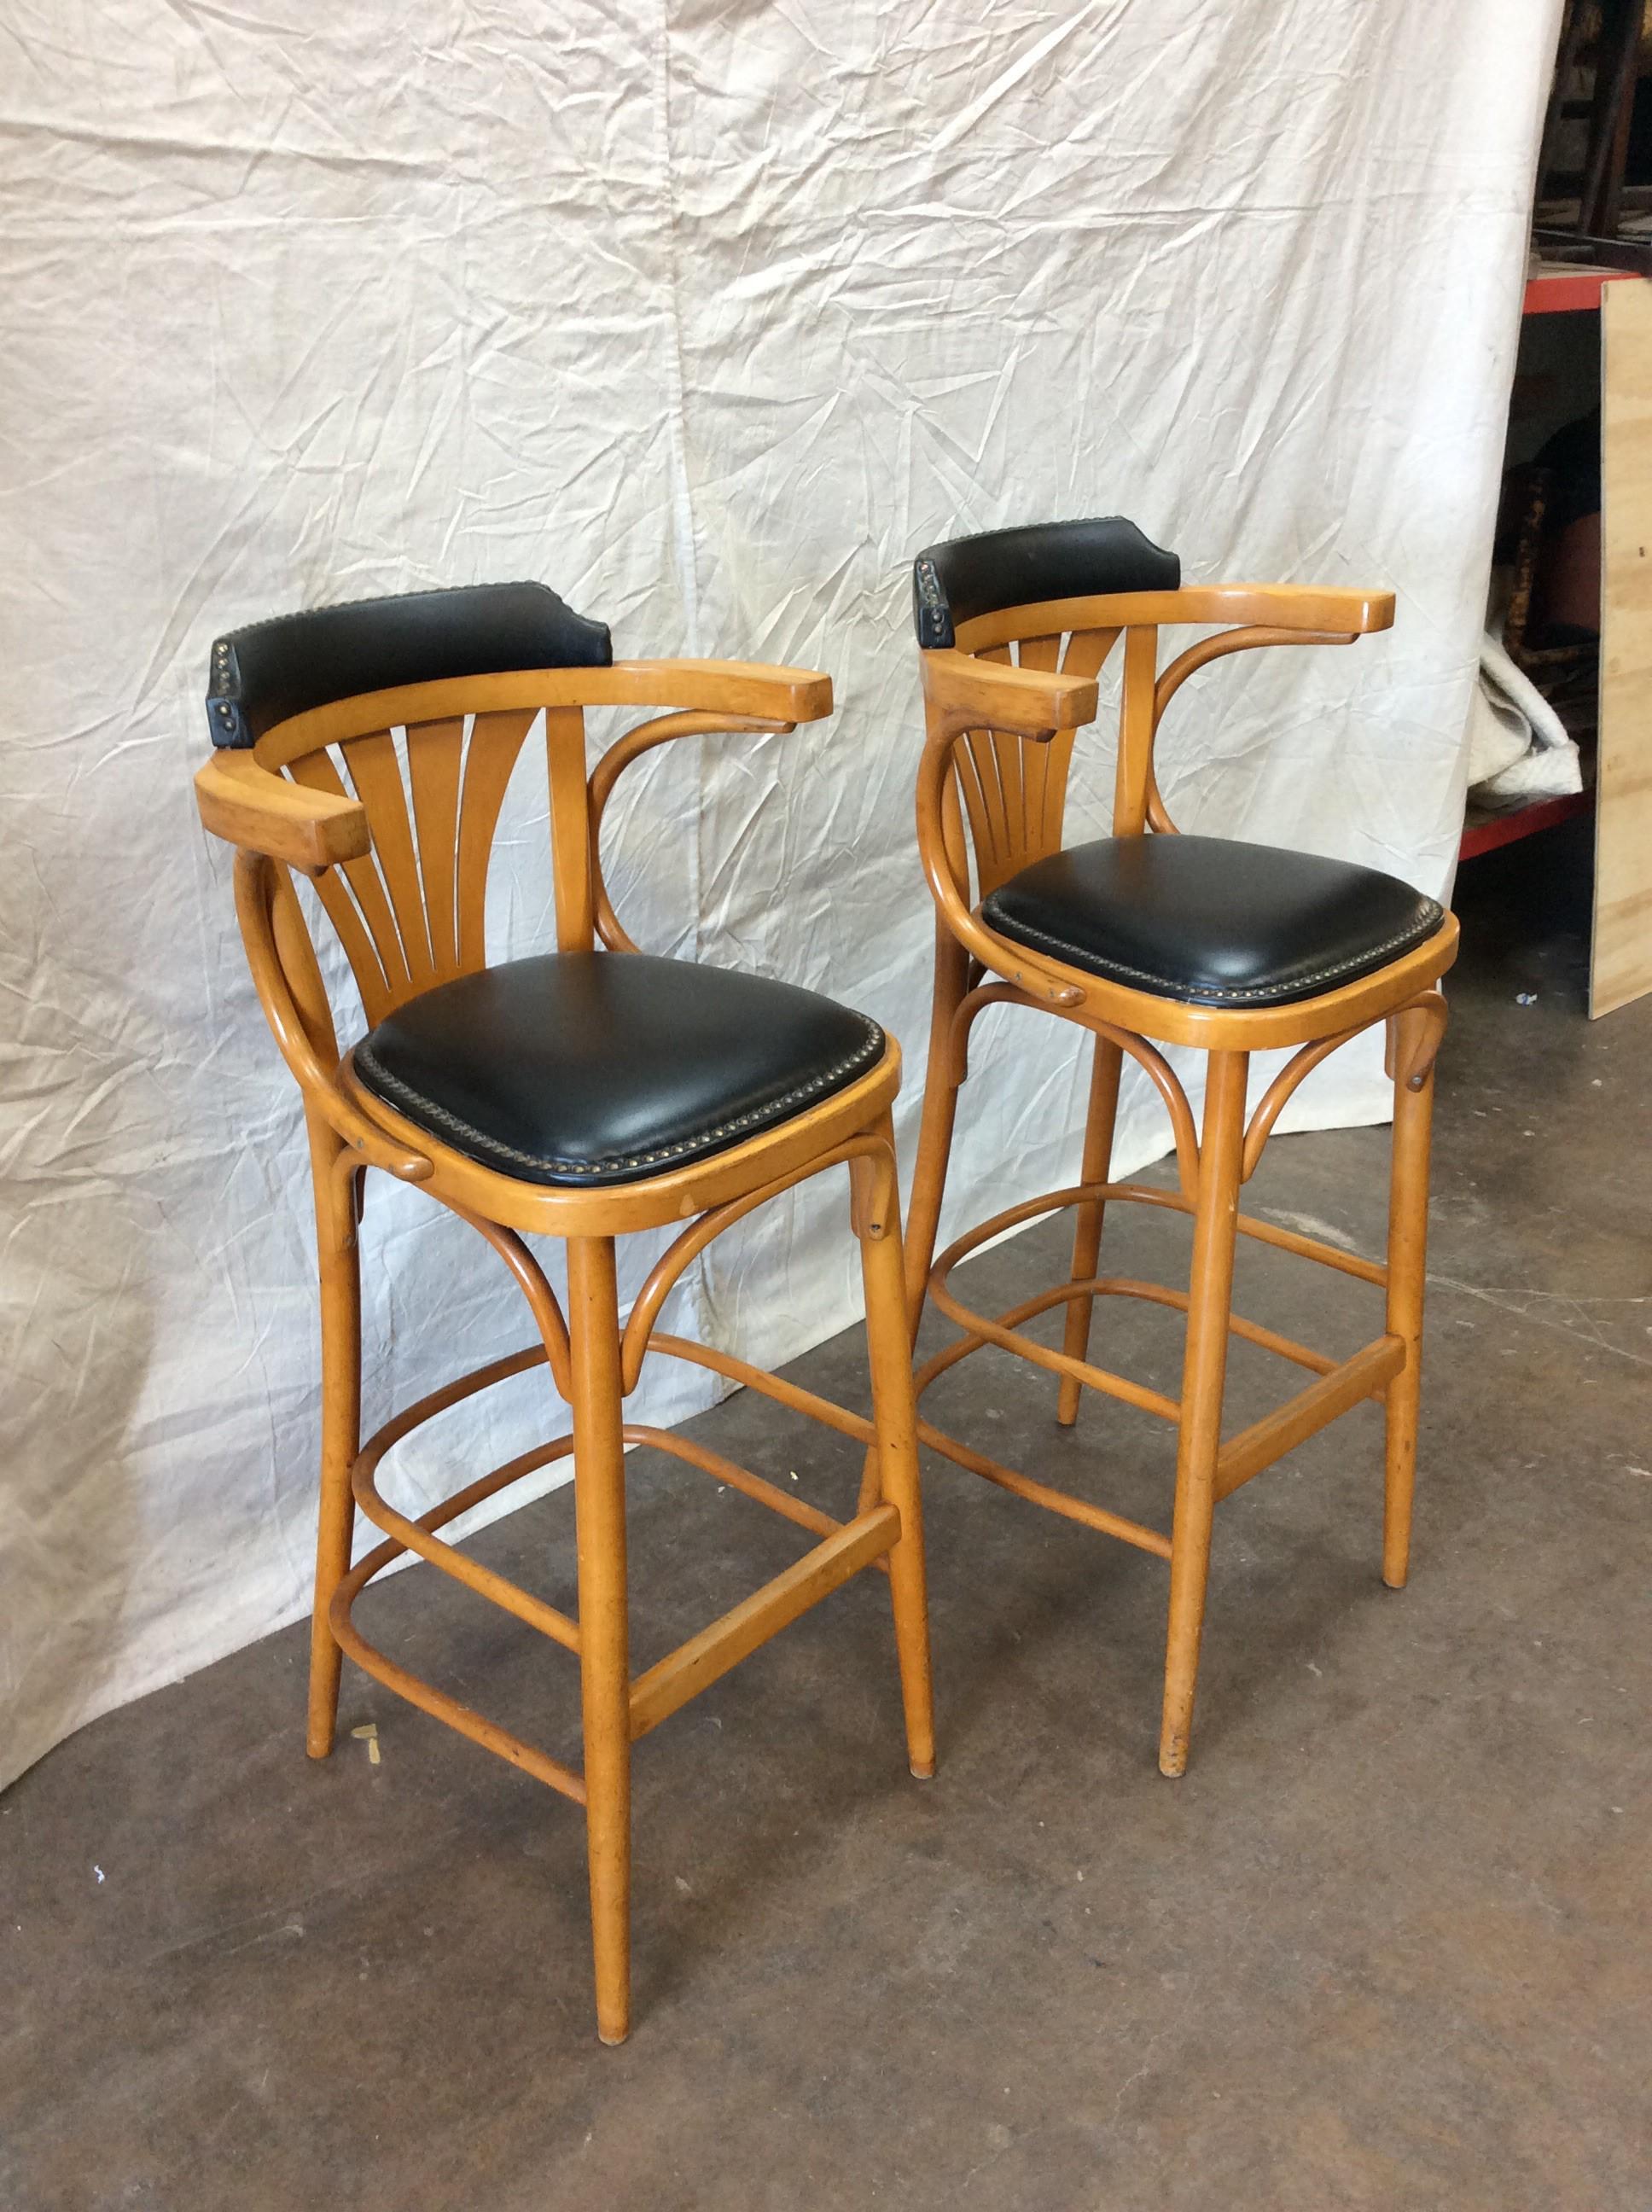 Found in the South of France, these Mid-20th century French Leather Counter or Barstools feature a beautiful wooden construction with upholstered black leather seats and backrest. The back of these stools are constructed with a unique slatted back